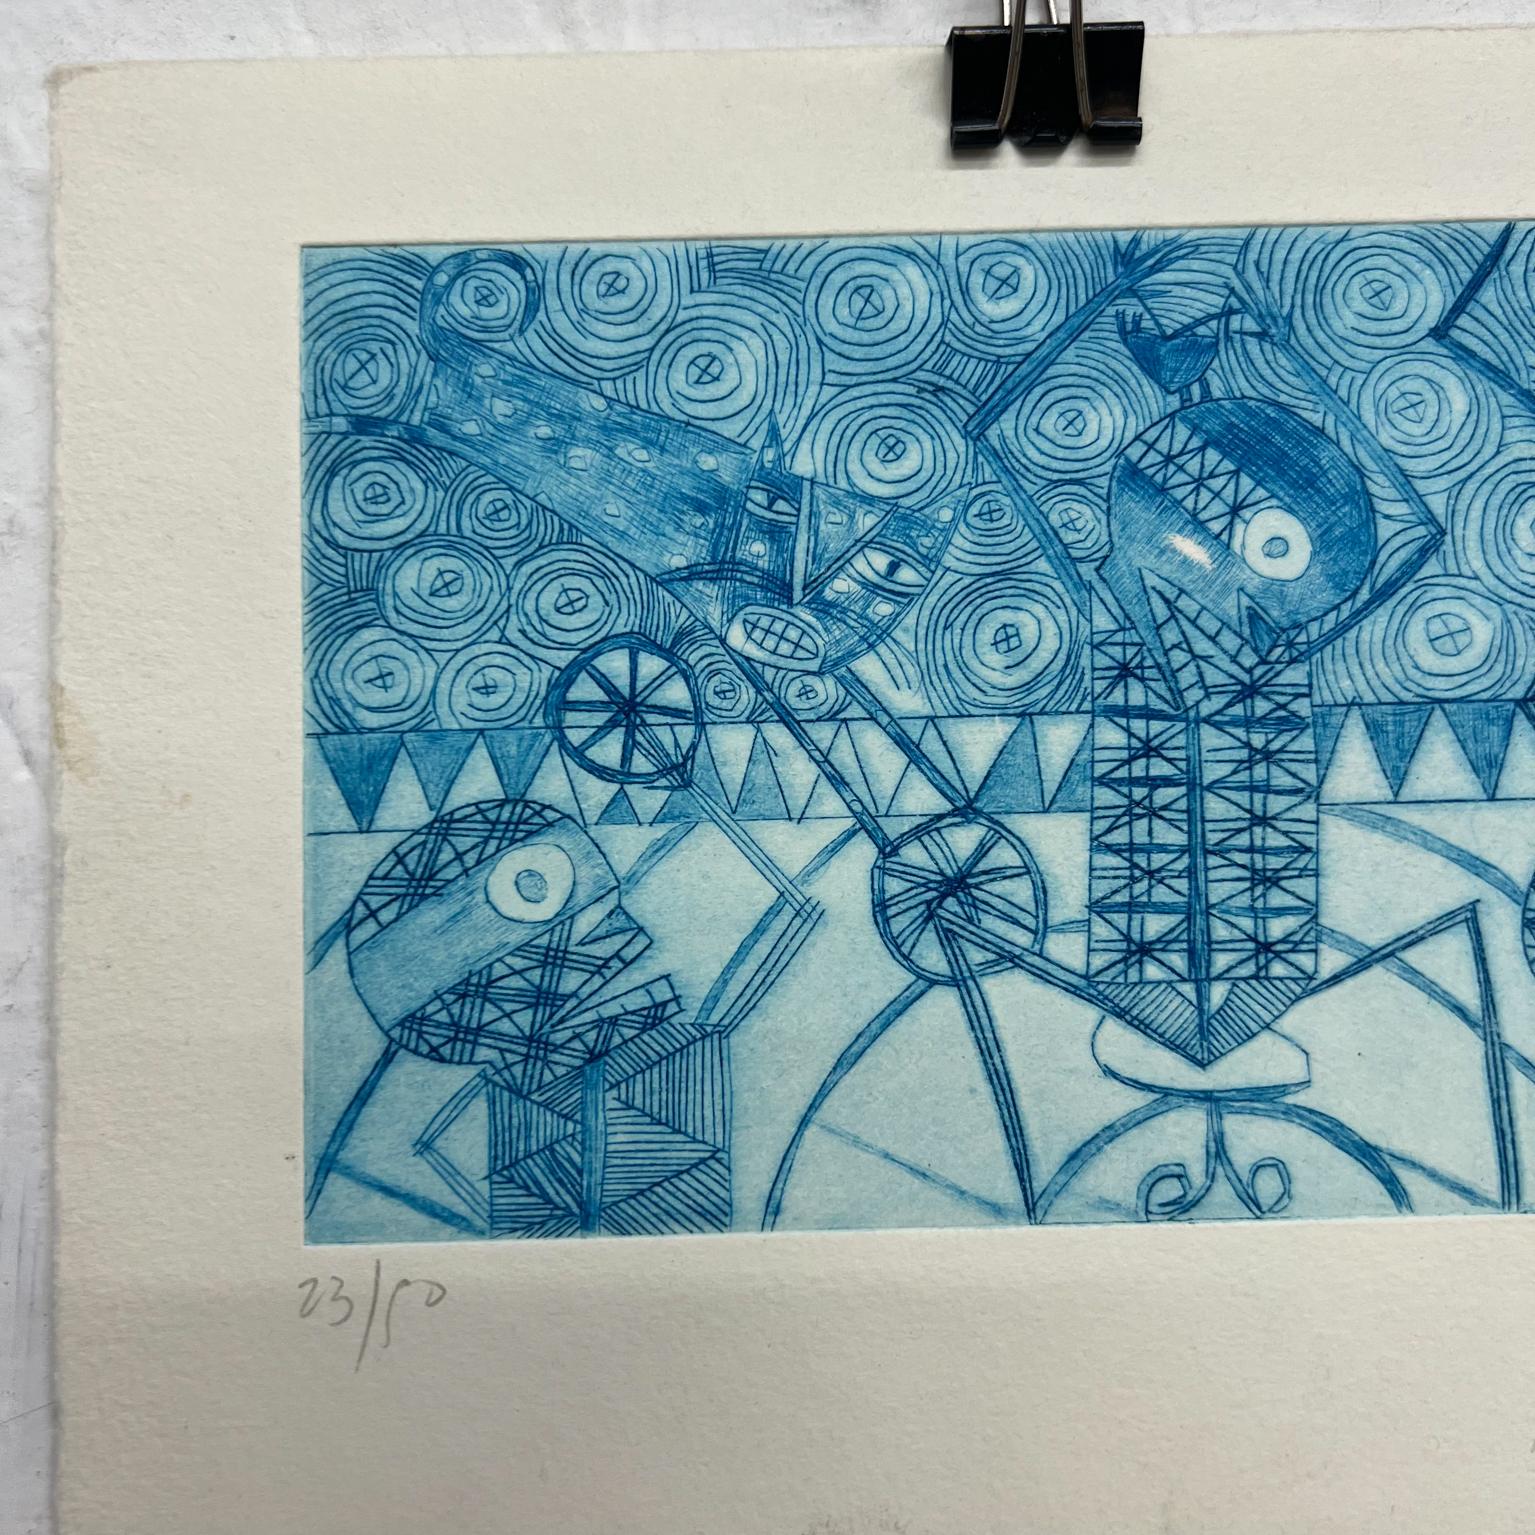 Mexican Modern original Art Oaxaca artist 23/50 blue drawing 6
Signed Numbered Woodblock Print
Measures: 7.75 x 6 x Art 5.85 x 3.75
Preowned vintage art unrestored condition
See all images please.






